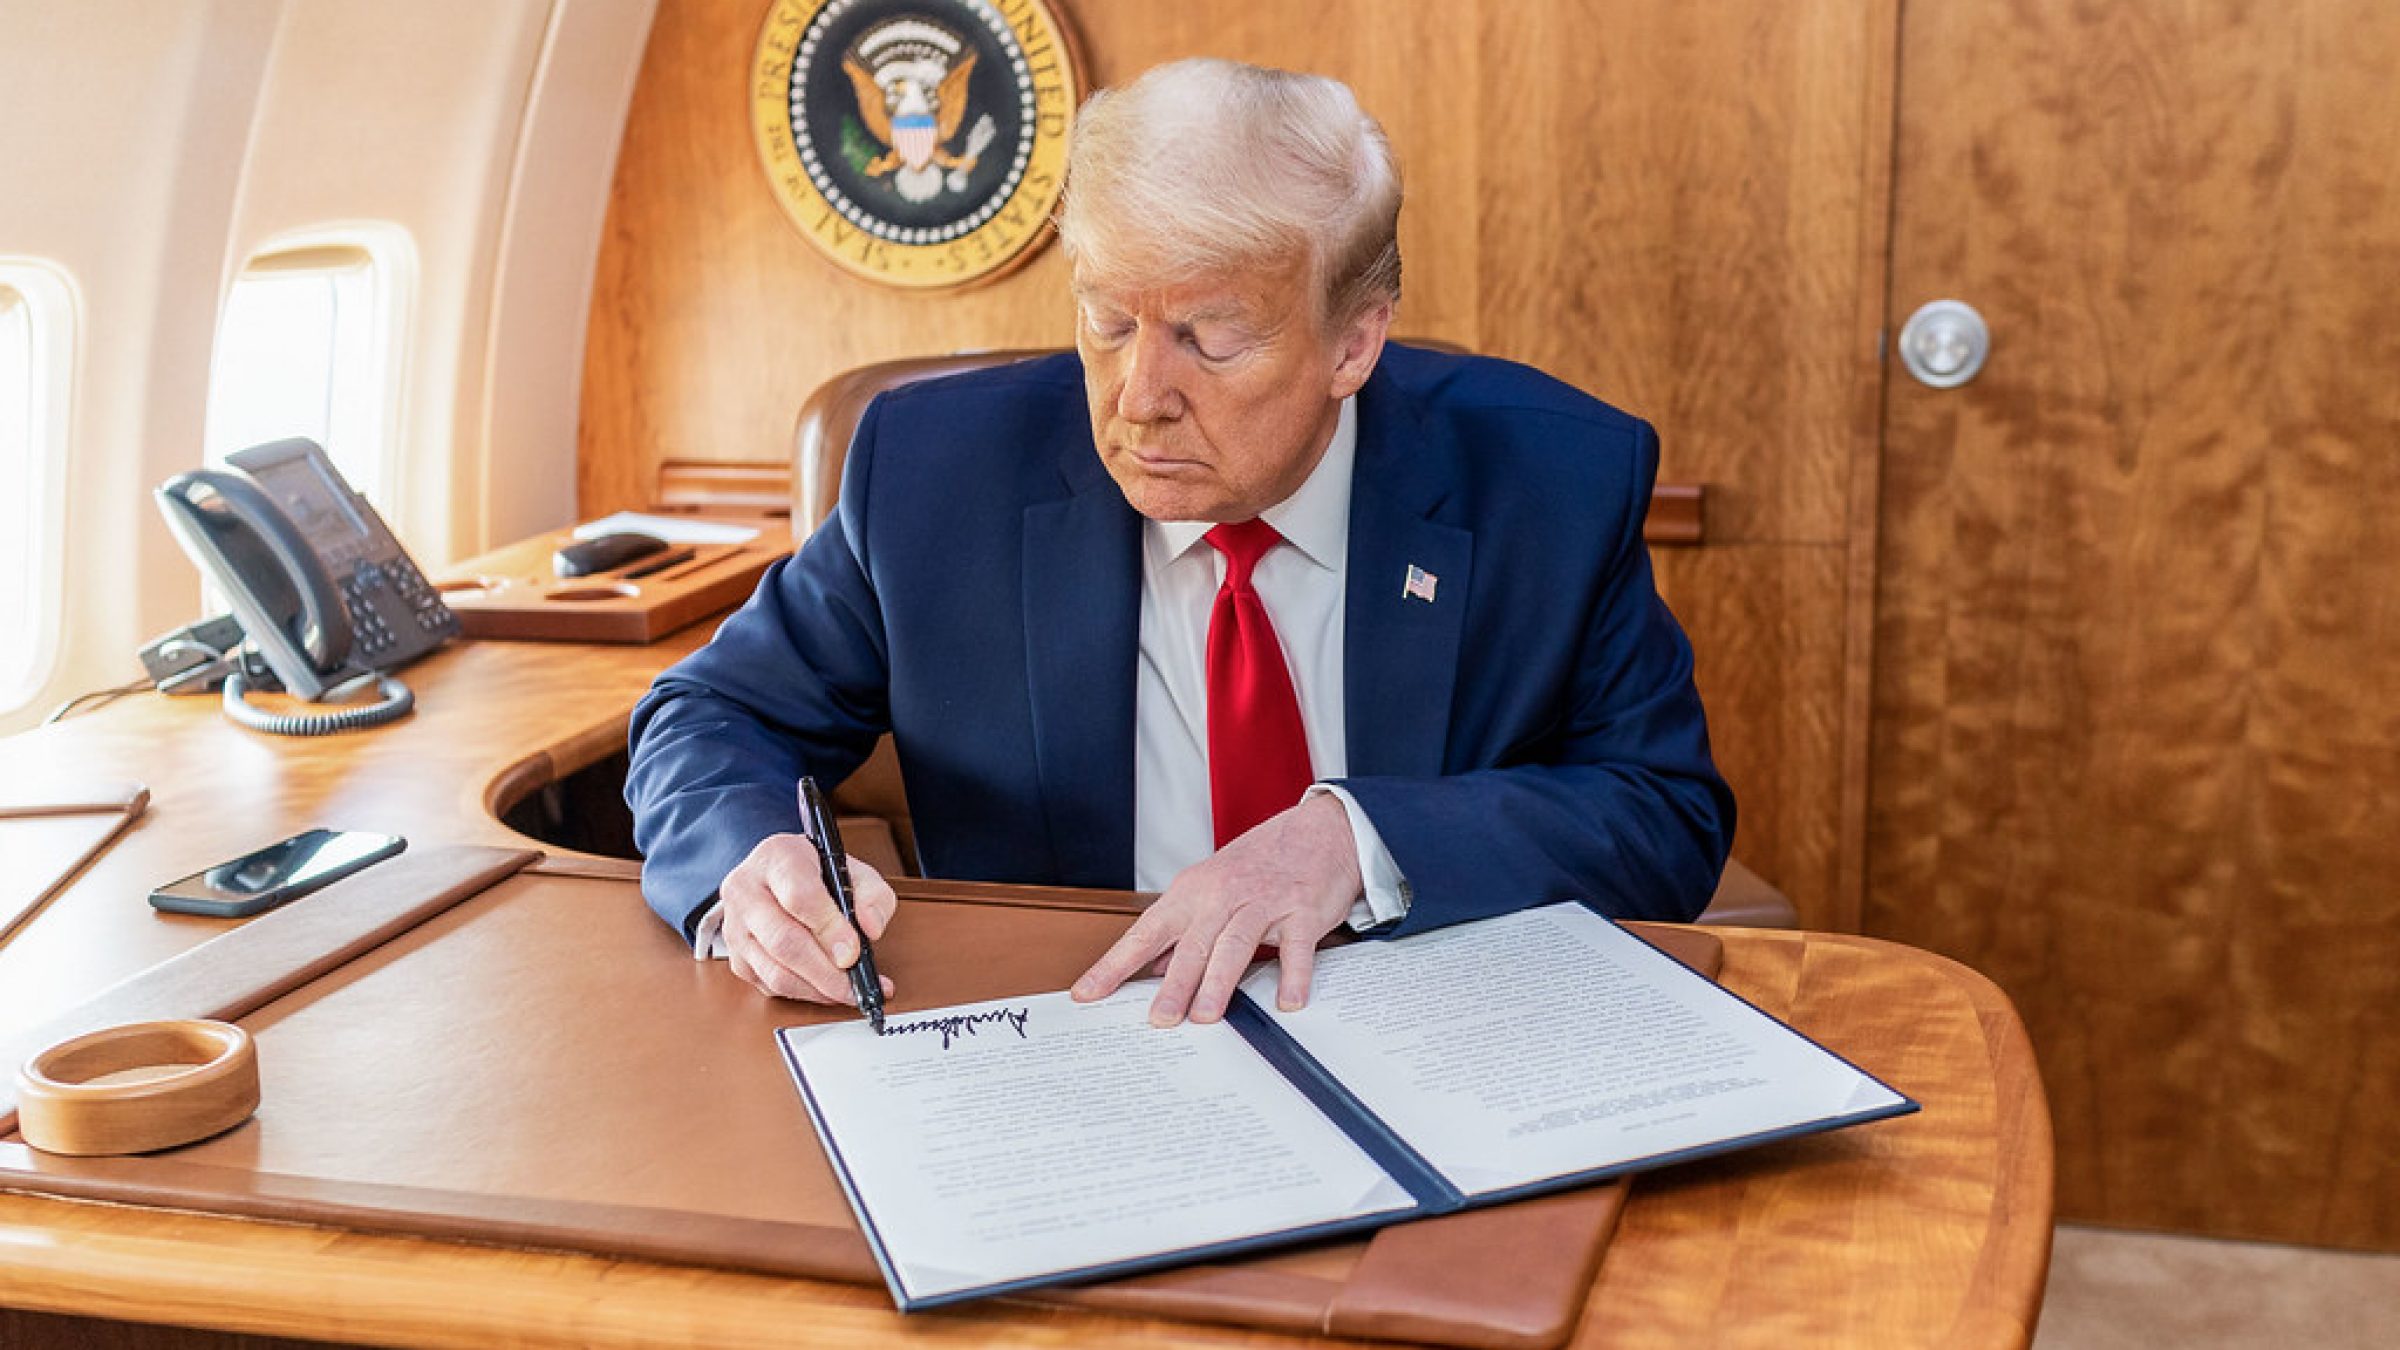 Image of President Trump at a desk, signing a bill